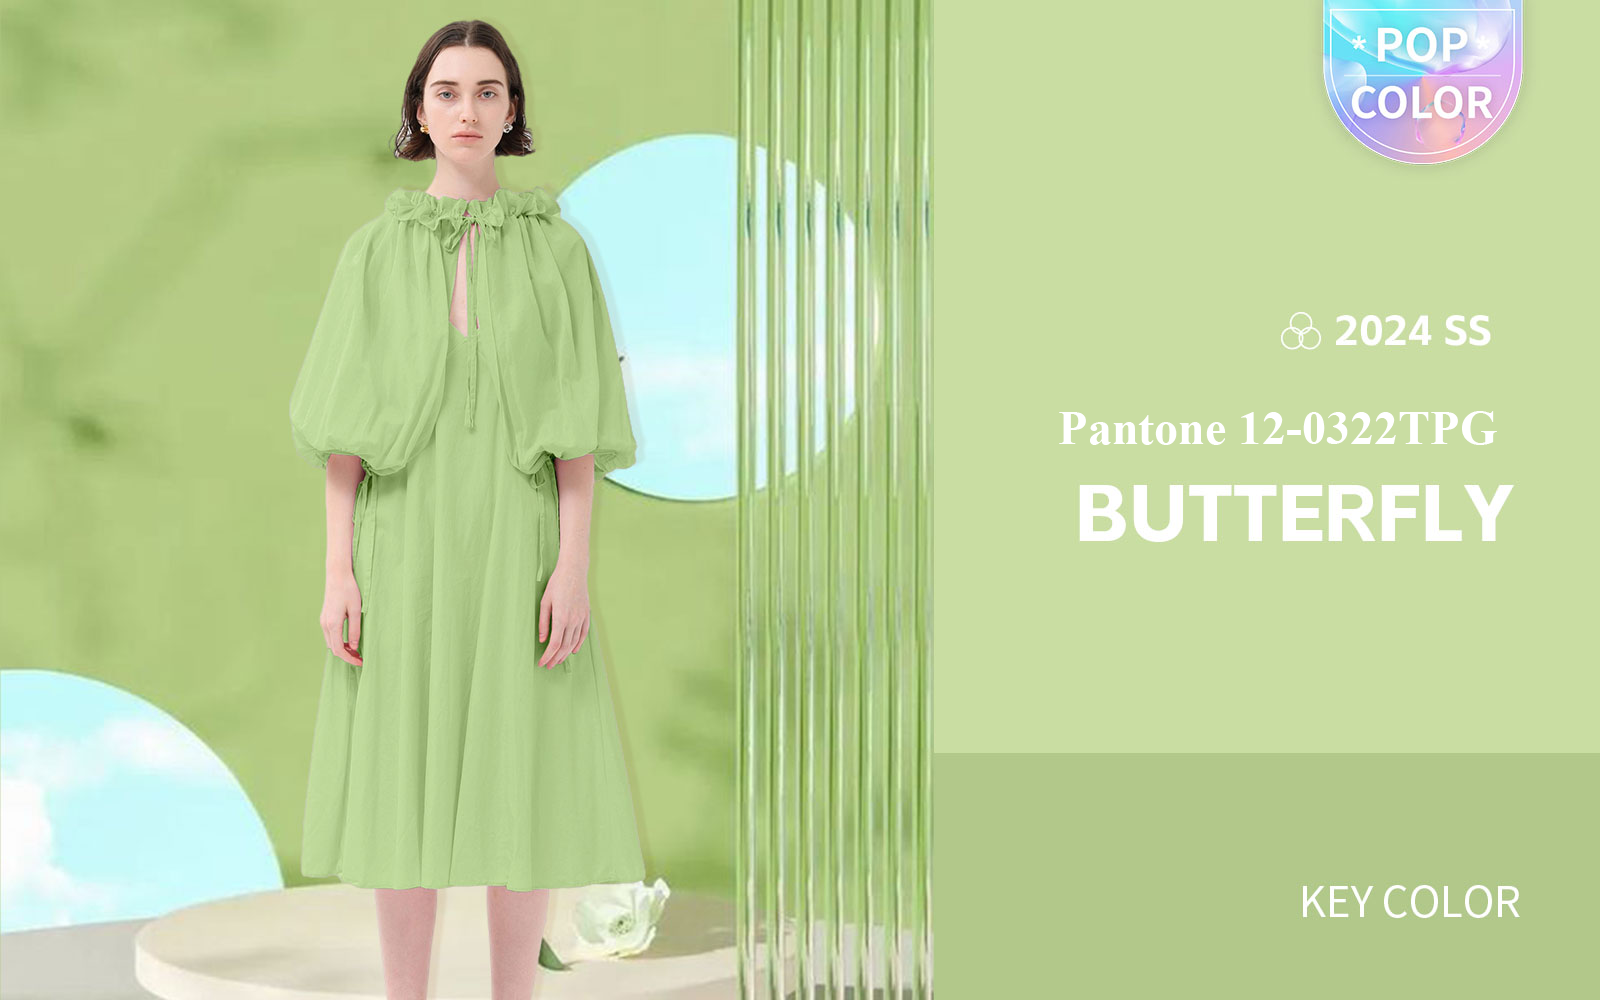 Butterfly -- The Color Trend for Womenswear